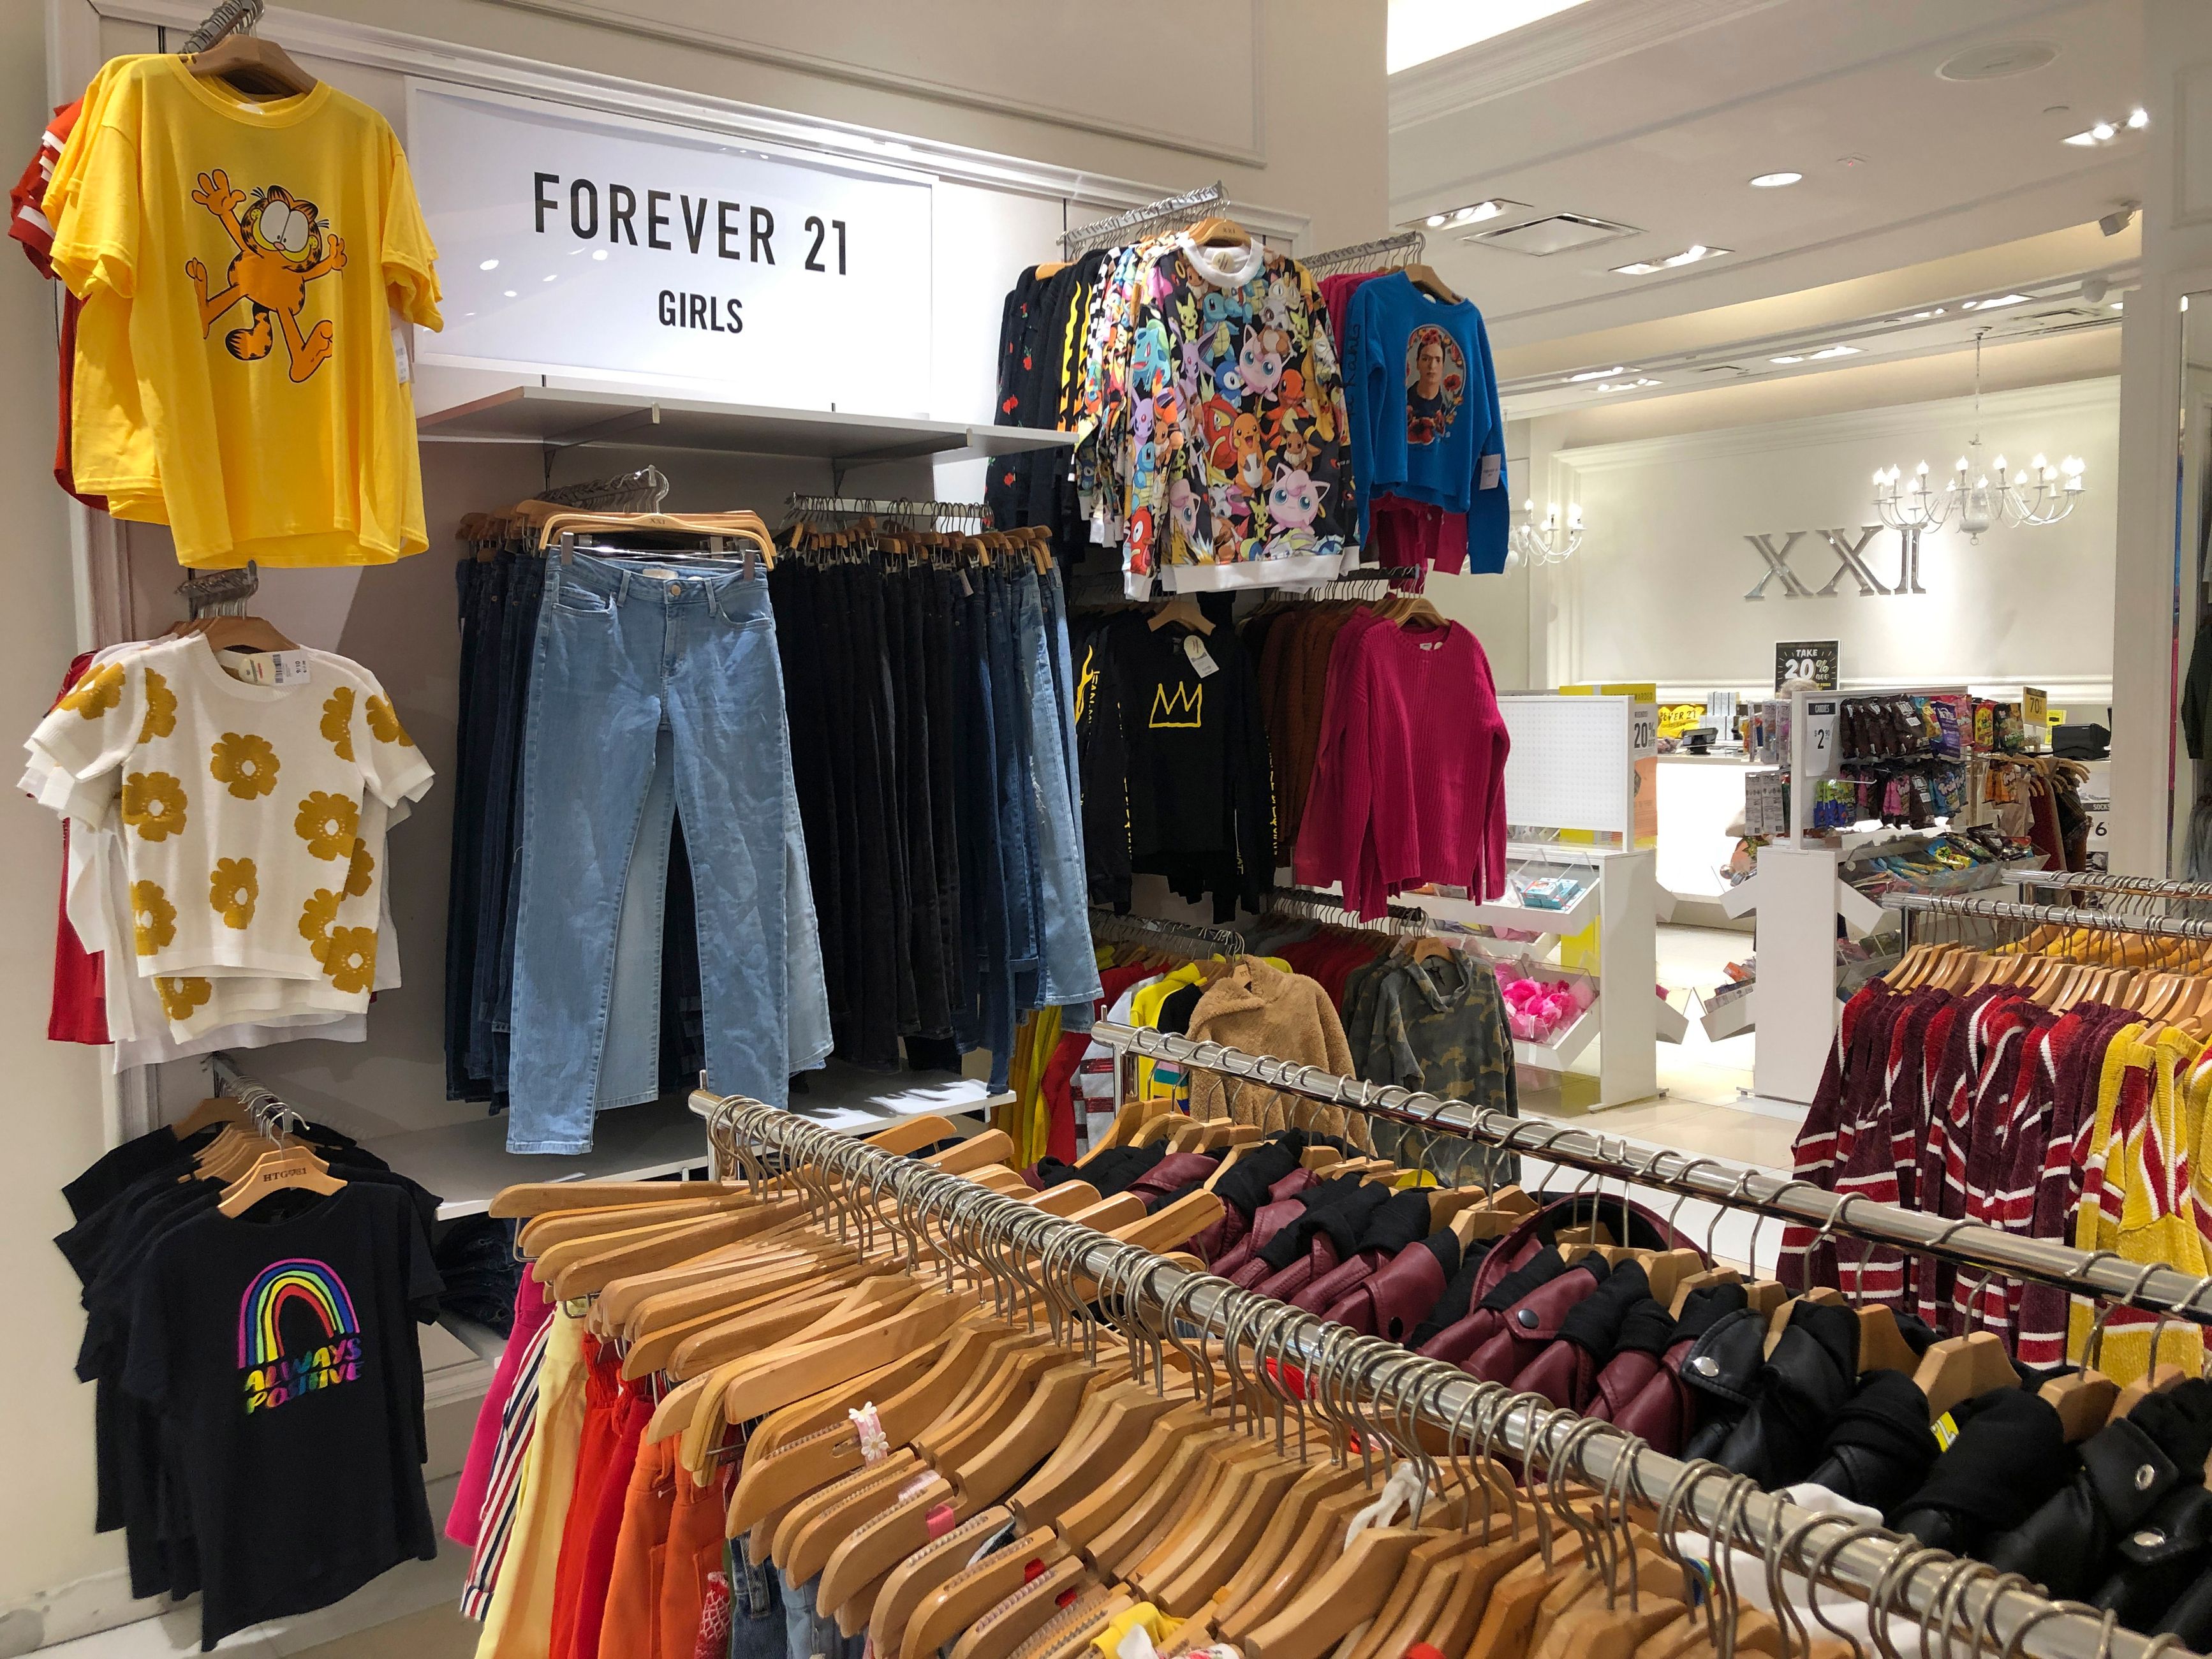 Forever 21 bankruptcy reflects teens' new shopping behavior | The